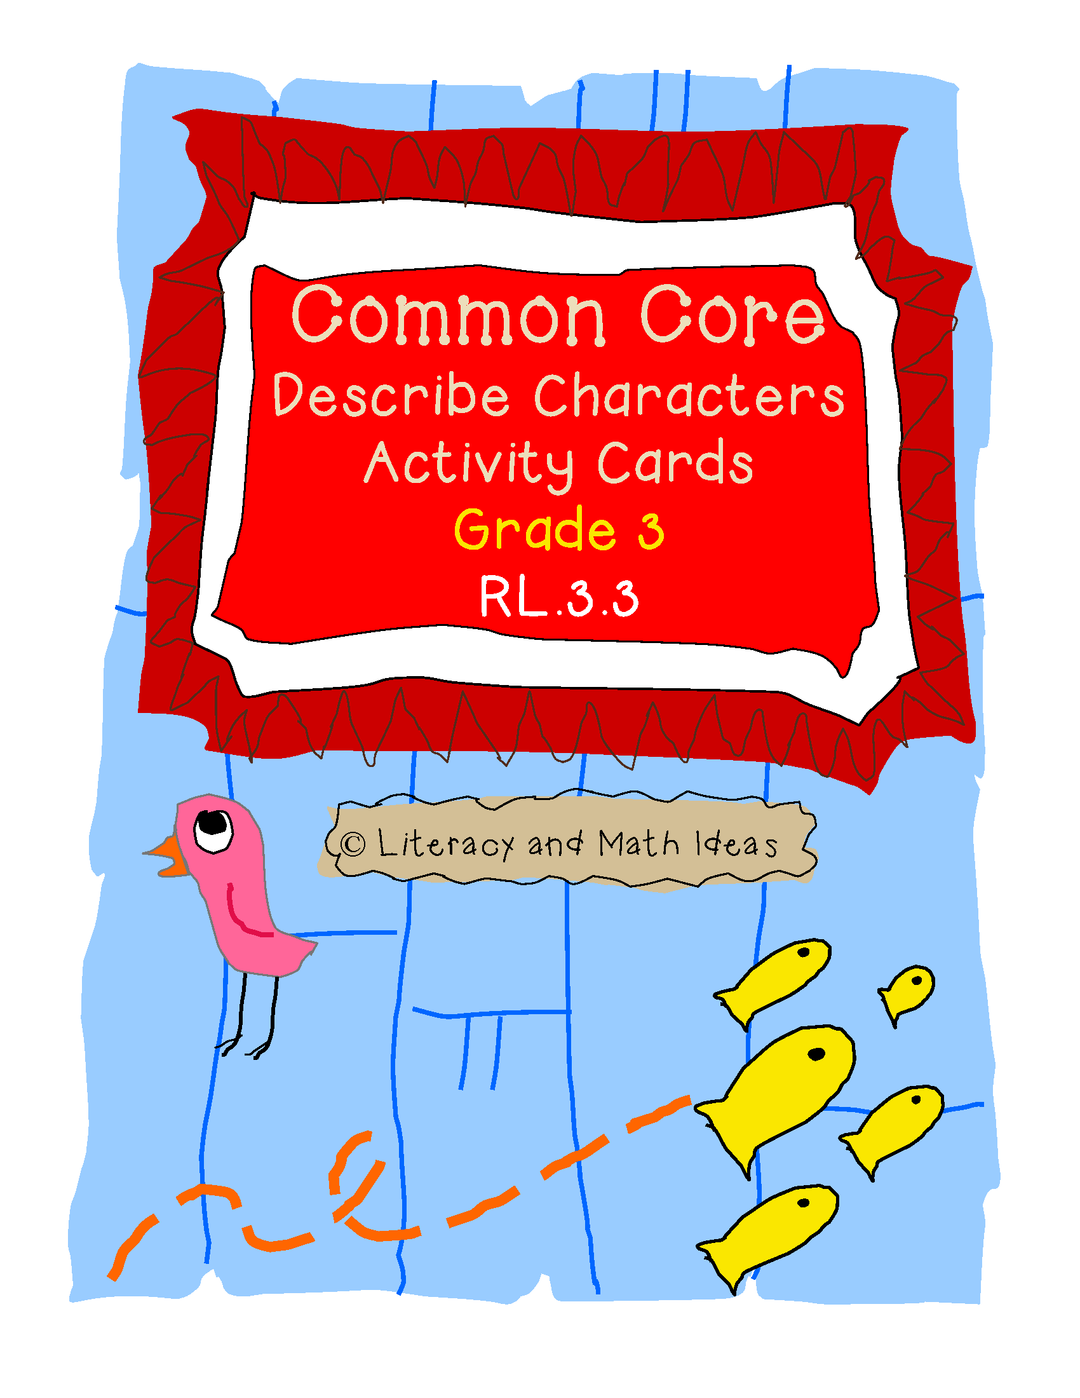 Describe Characters Activity Cards Grade 3 Common Core RL.3.3